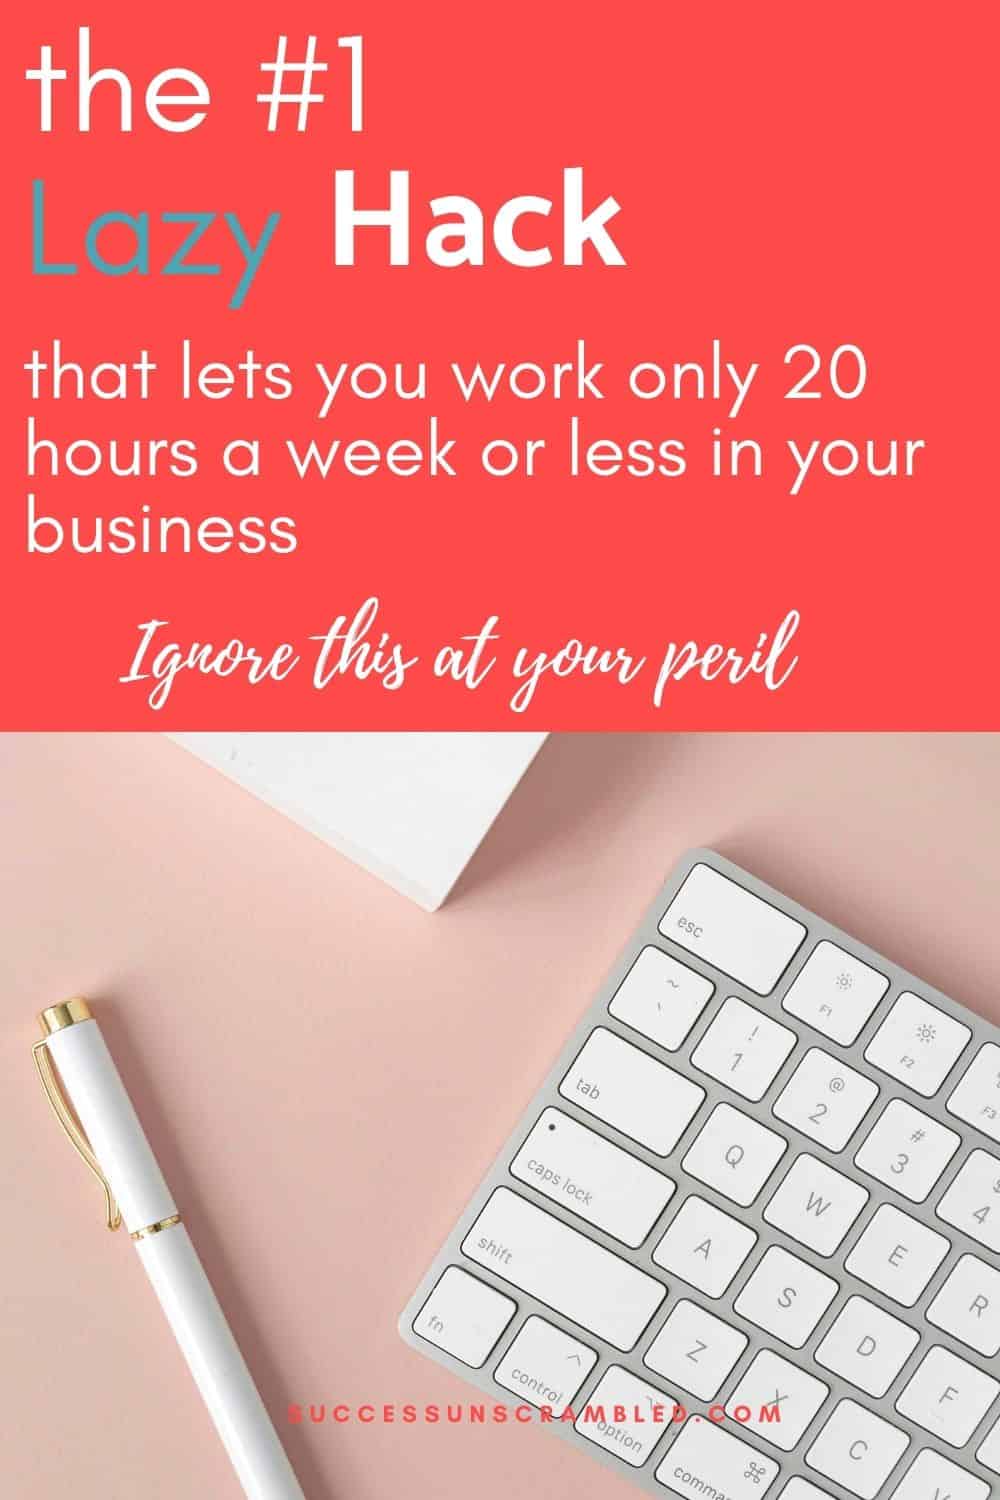 Number 1 lazy hack to get you working 20 hours a week or less